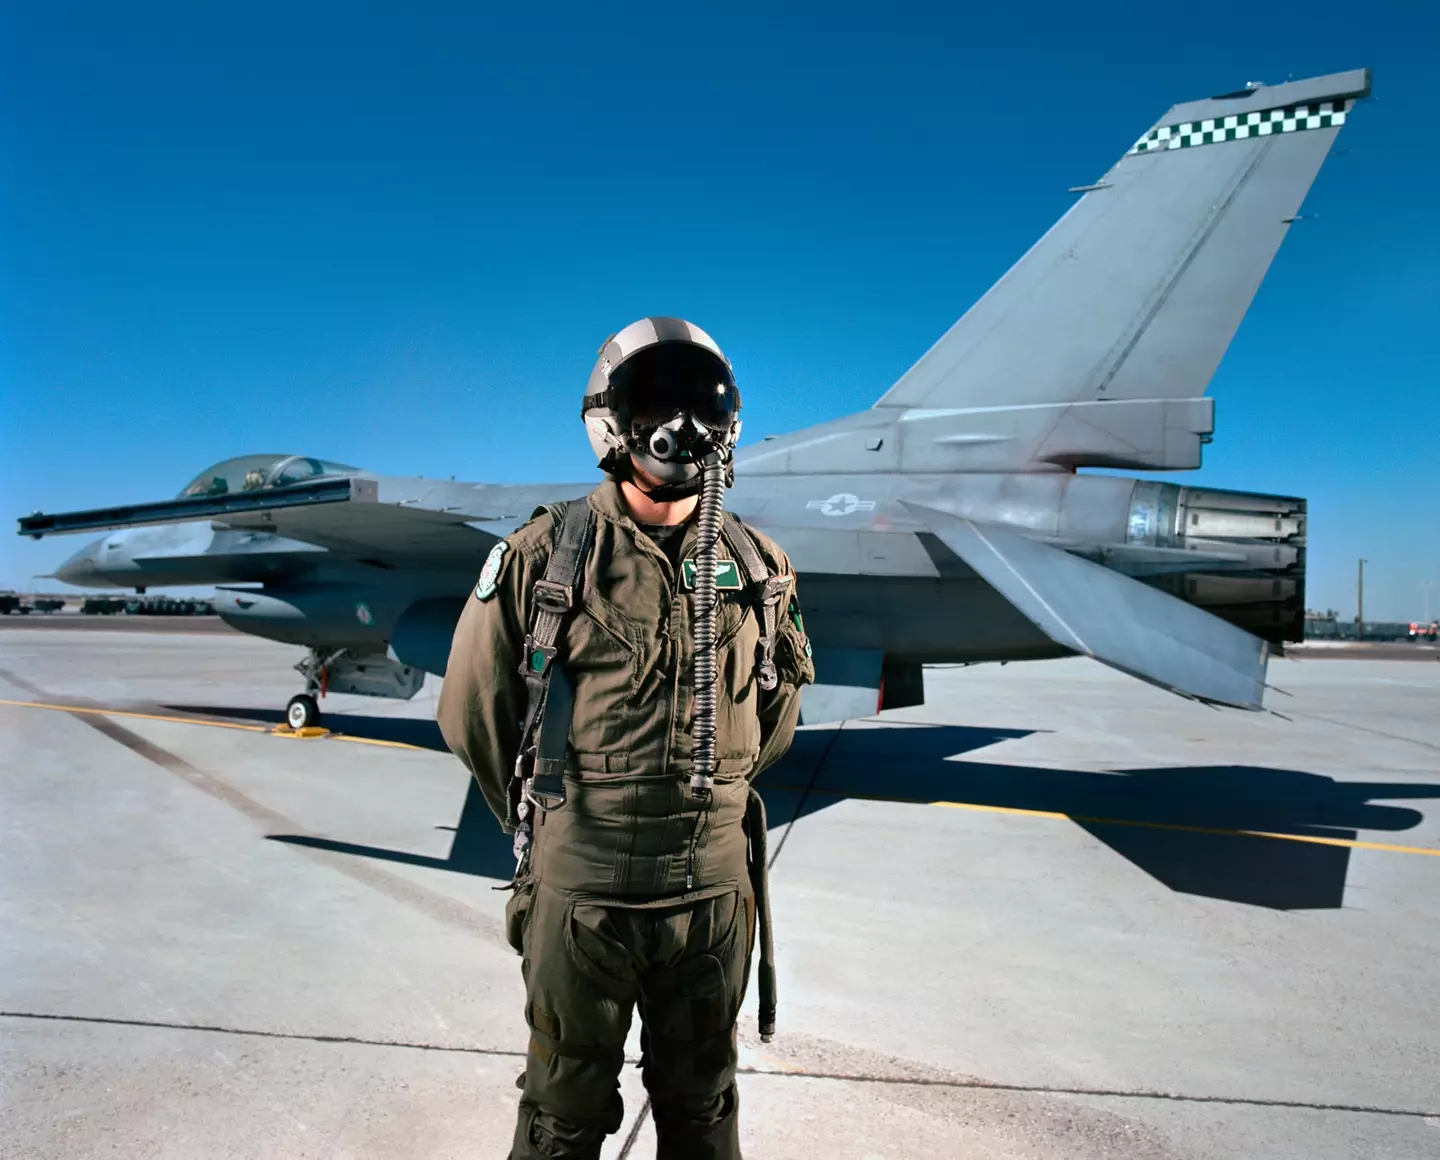 Fighter pilots use the machines to train.